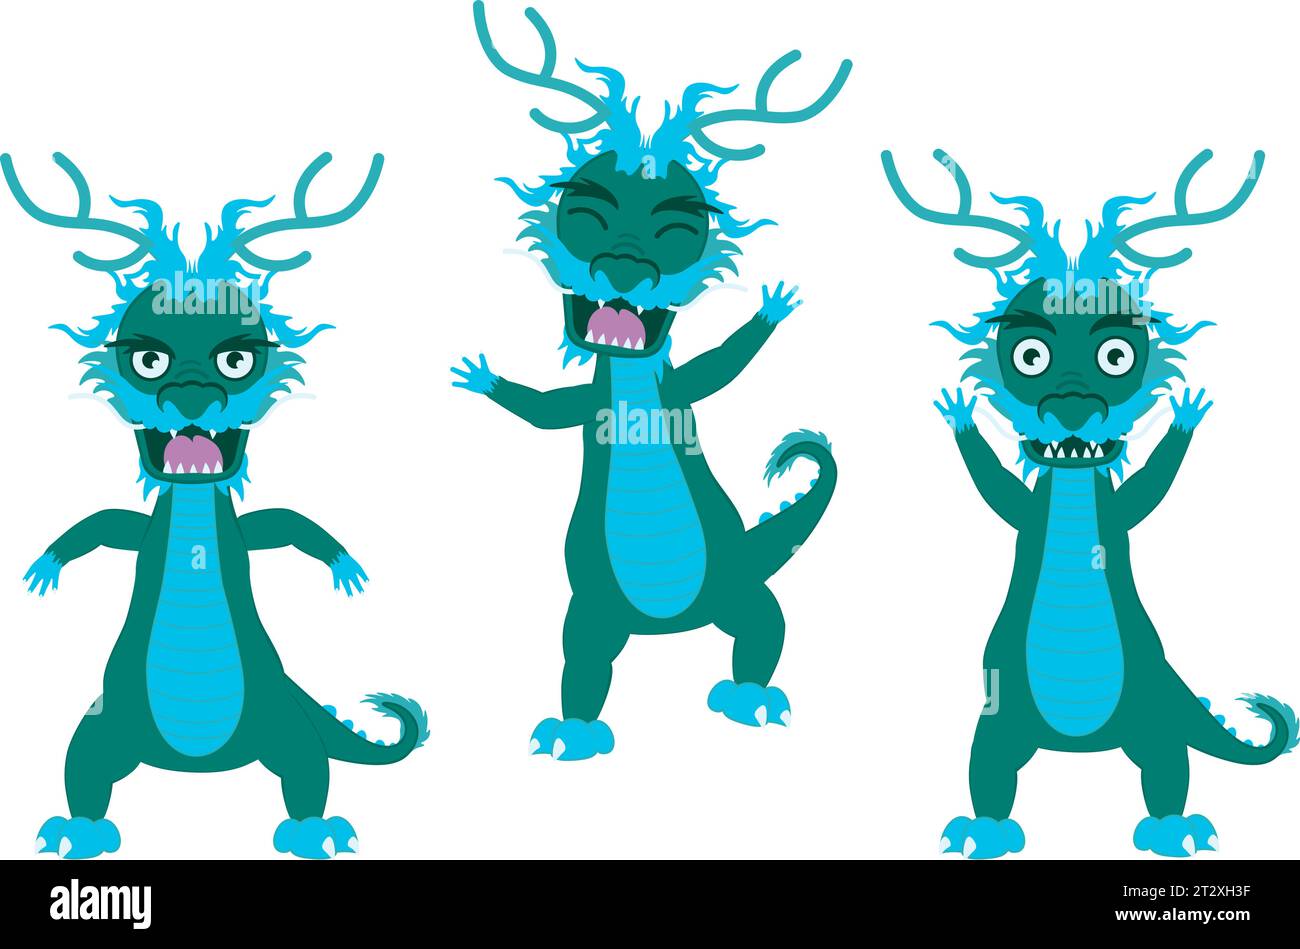 Abstract asian water dragon of green and blue colors. Stock Vector